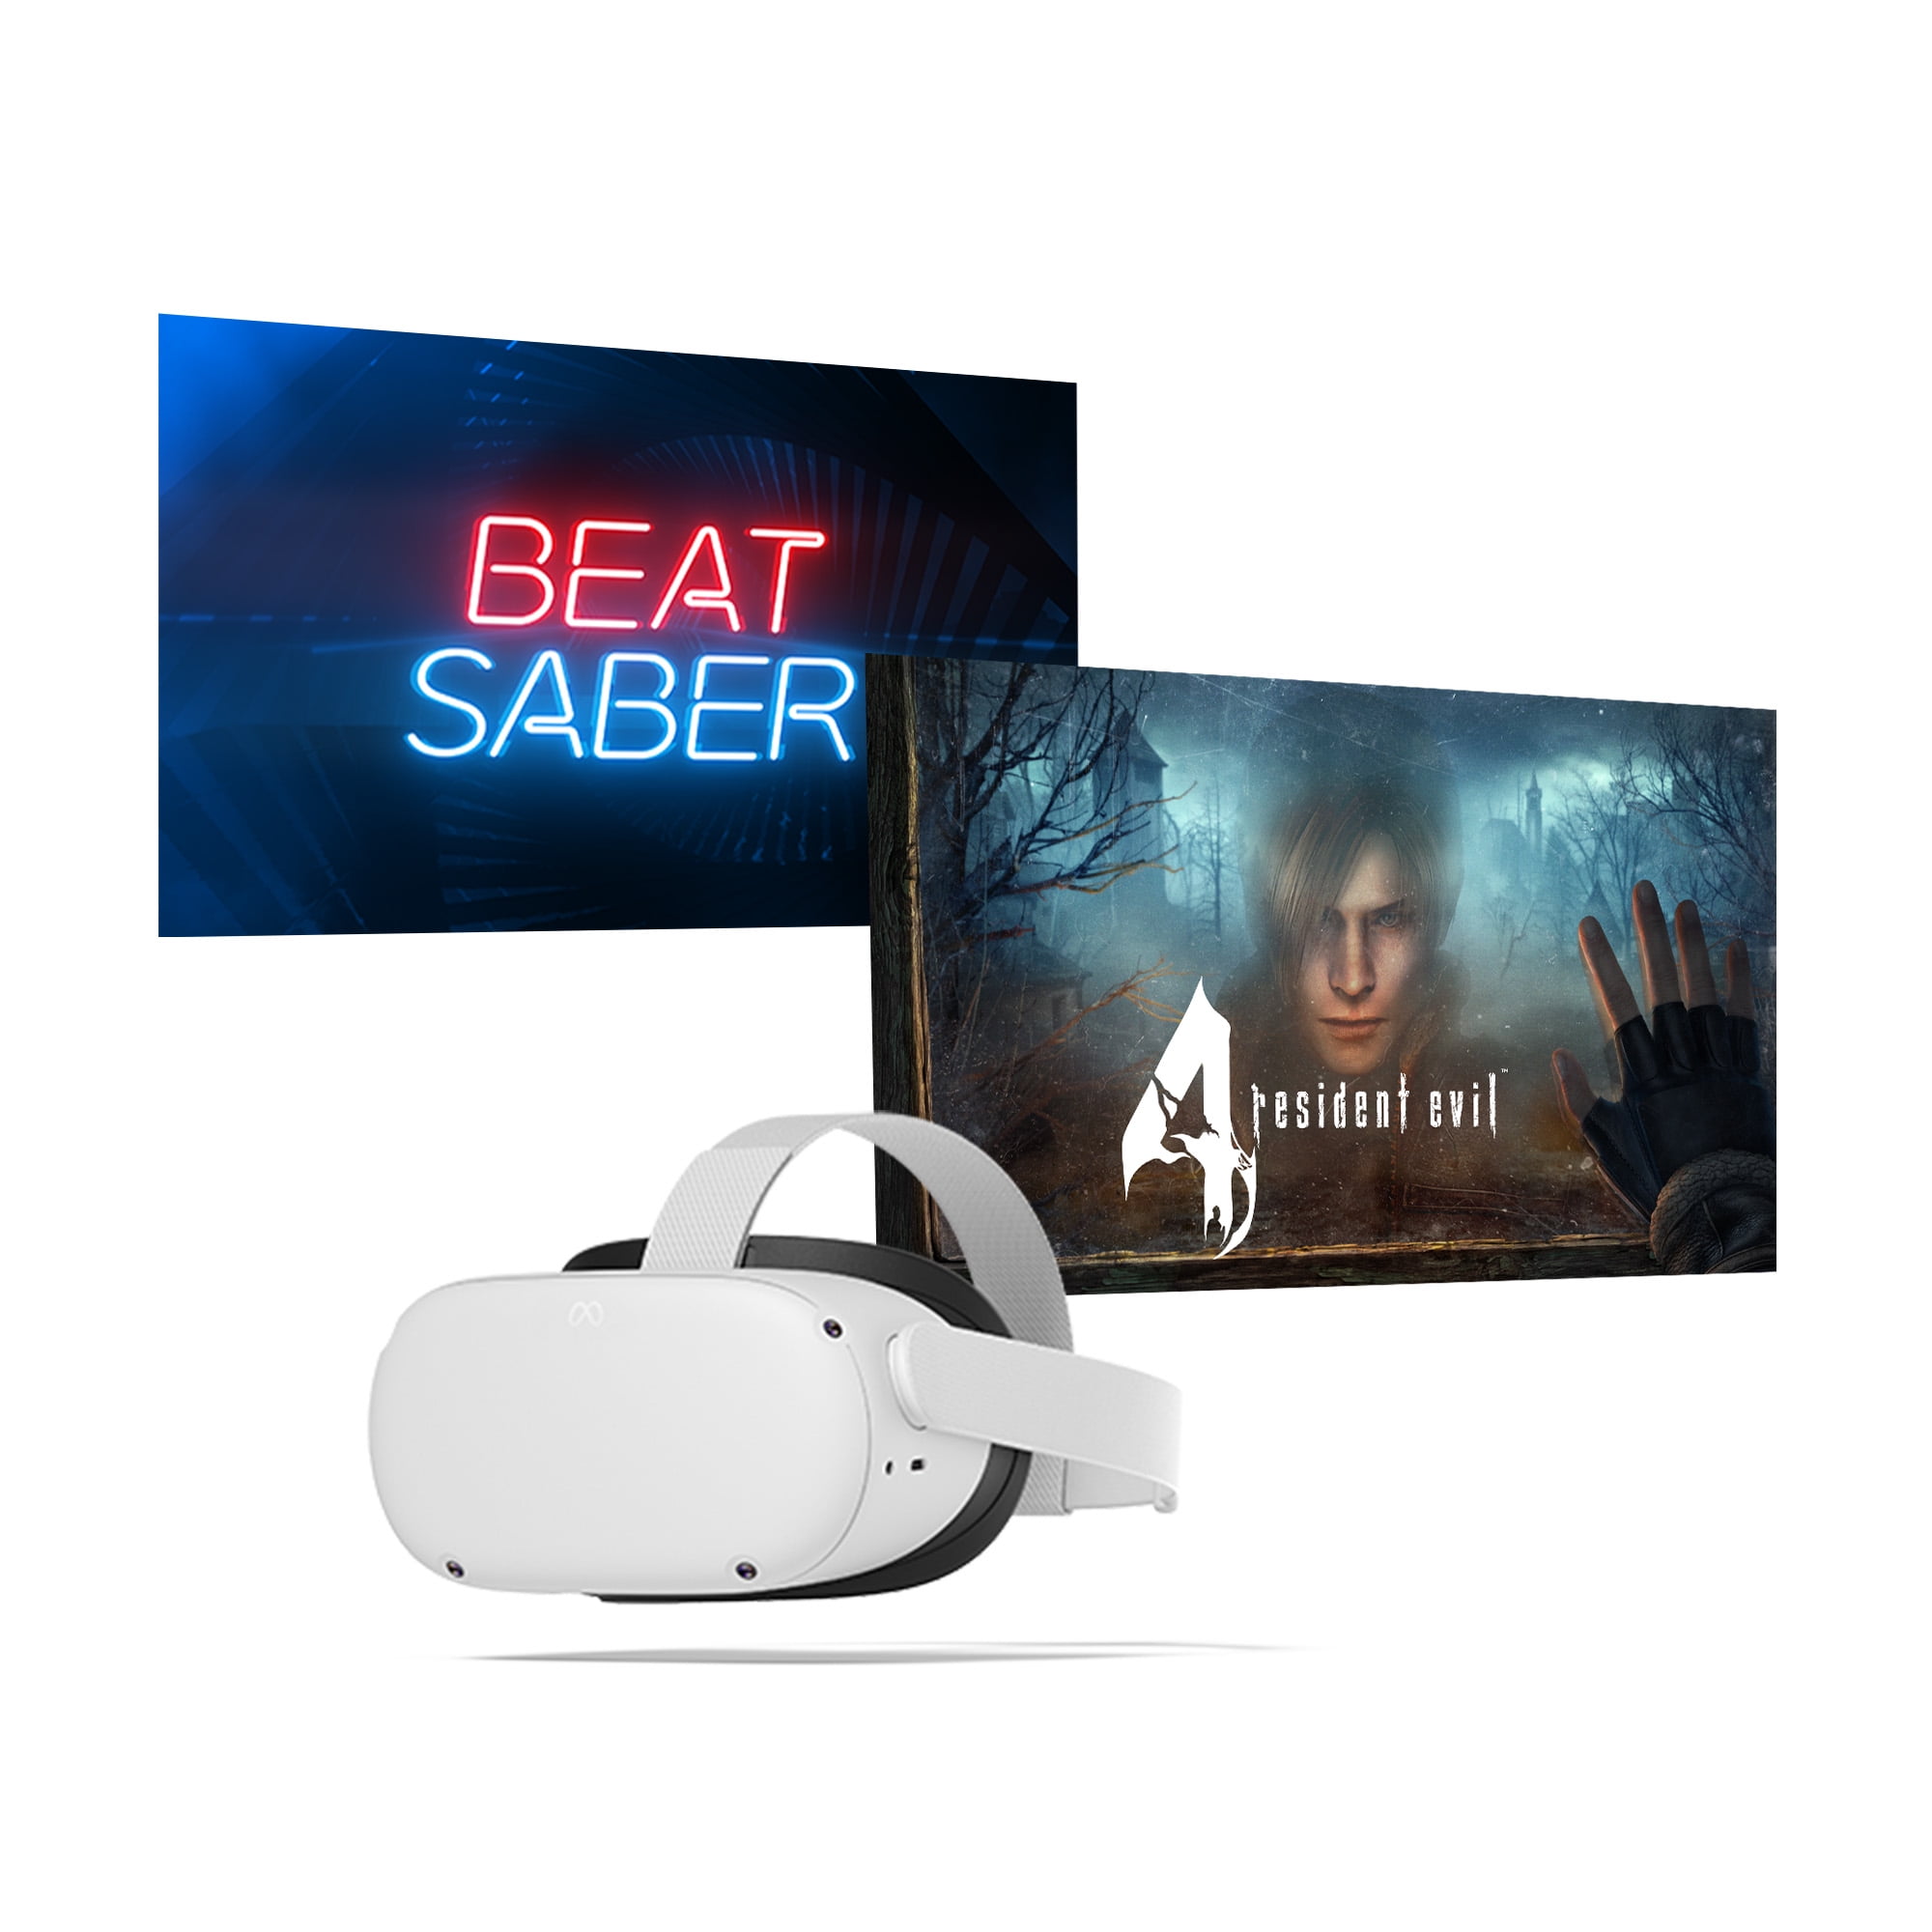 Meta Quest 2 — Advanced All-In-One Virtual Reality Headset — 128 GB with Resident Evil 4 and Beat Saber
